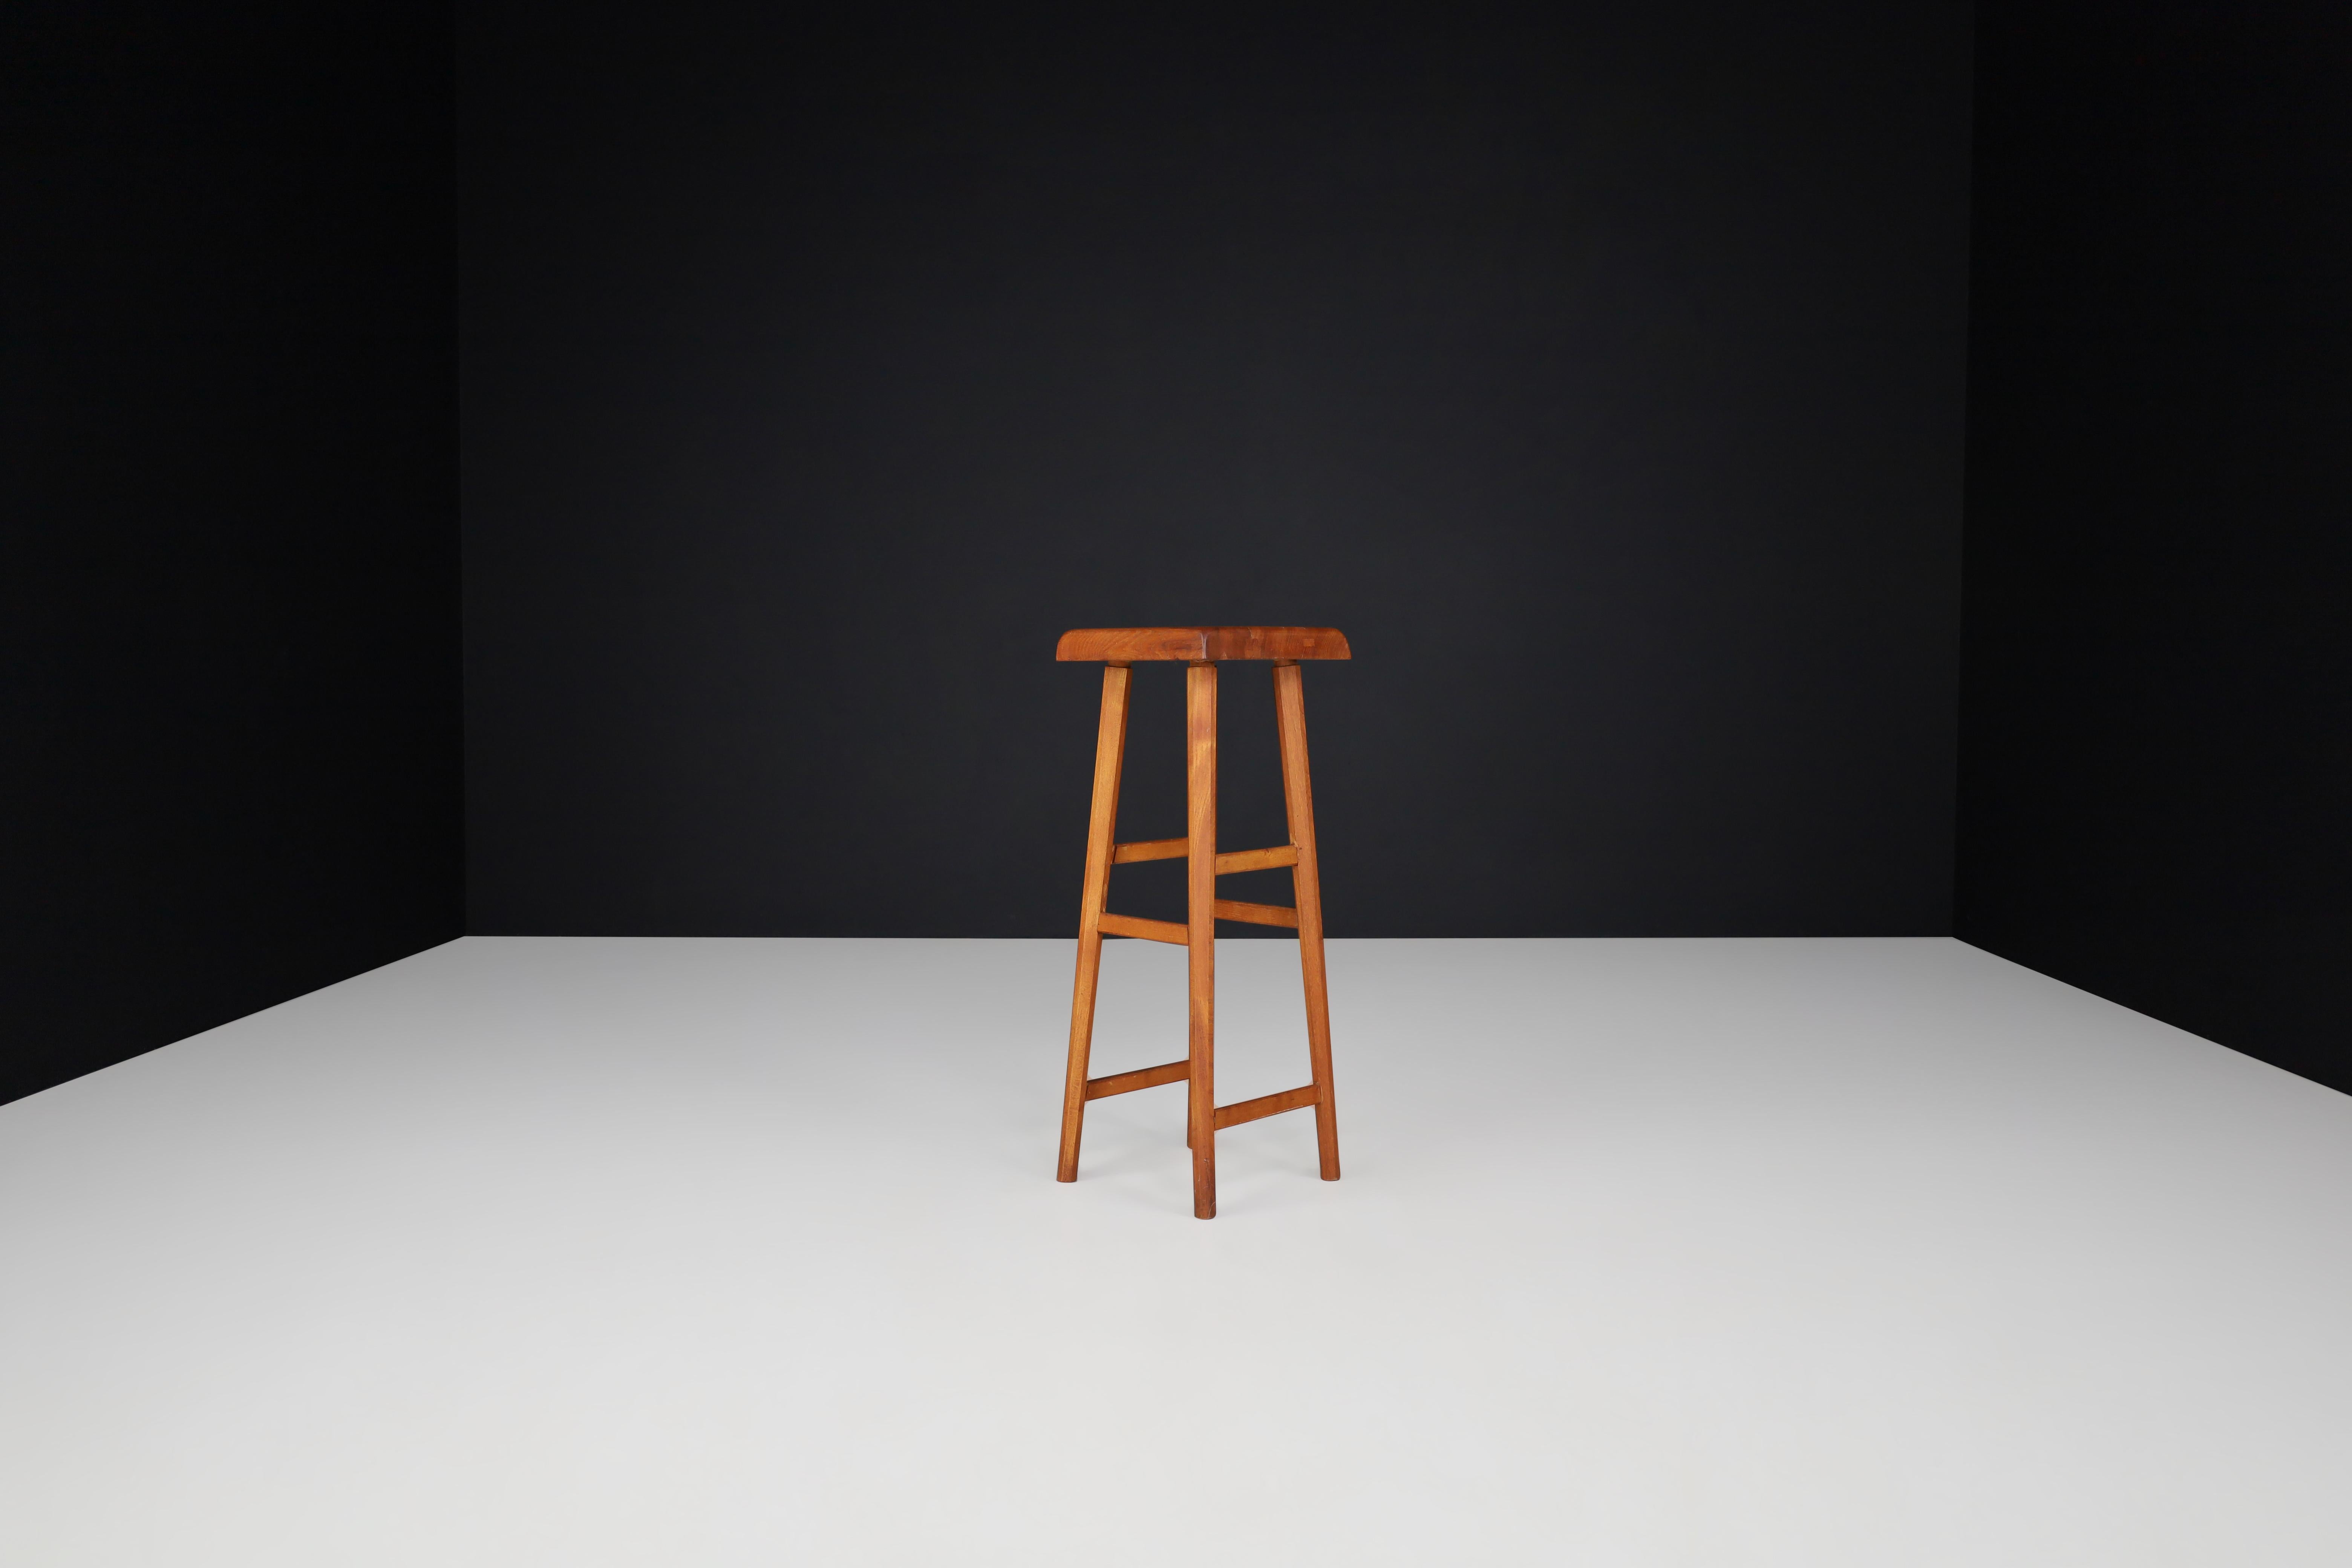 Pierre Chapo, Elm Bar Stool S-01-C. France, 1970

Bar tabouret - stool model S-01-C created by Pierre Chapo, France, 1970s. This stool is made out of solid elmwood with all original patina. In good original condition, with minor wear consistent